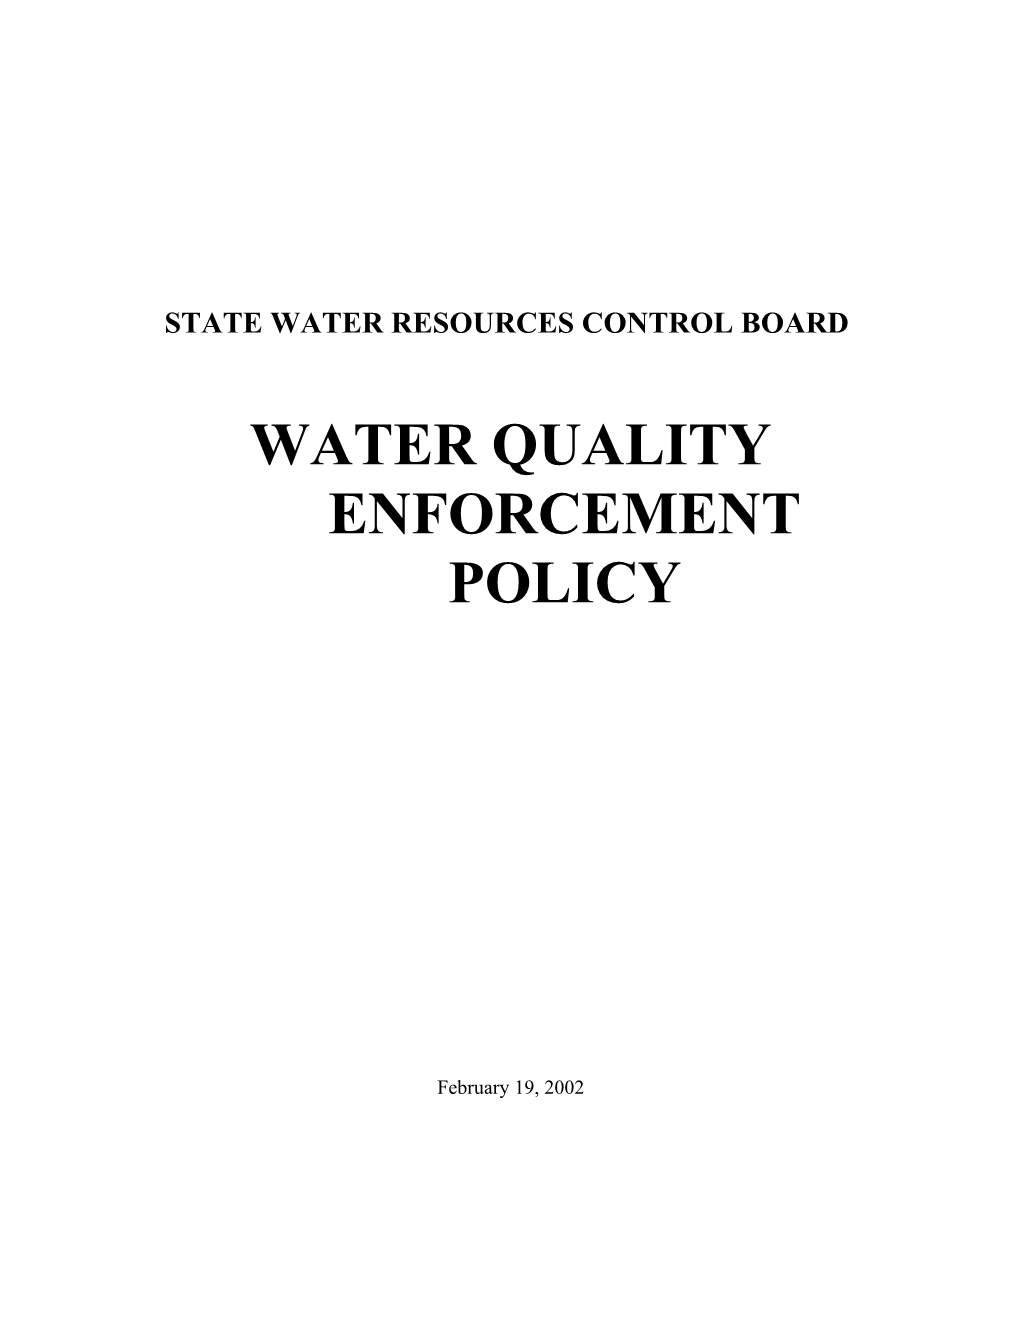 The State Water Resources Control Board